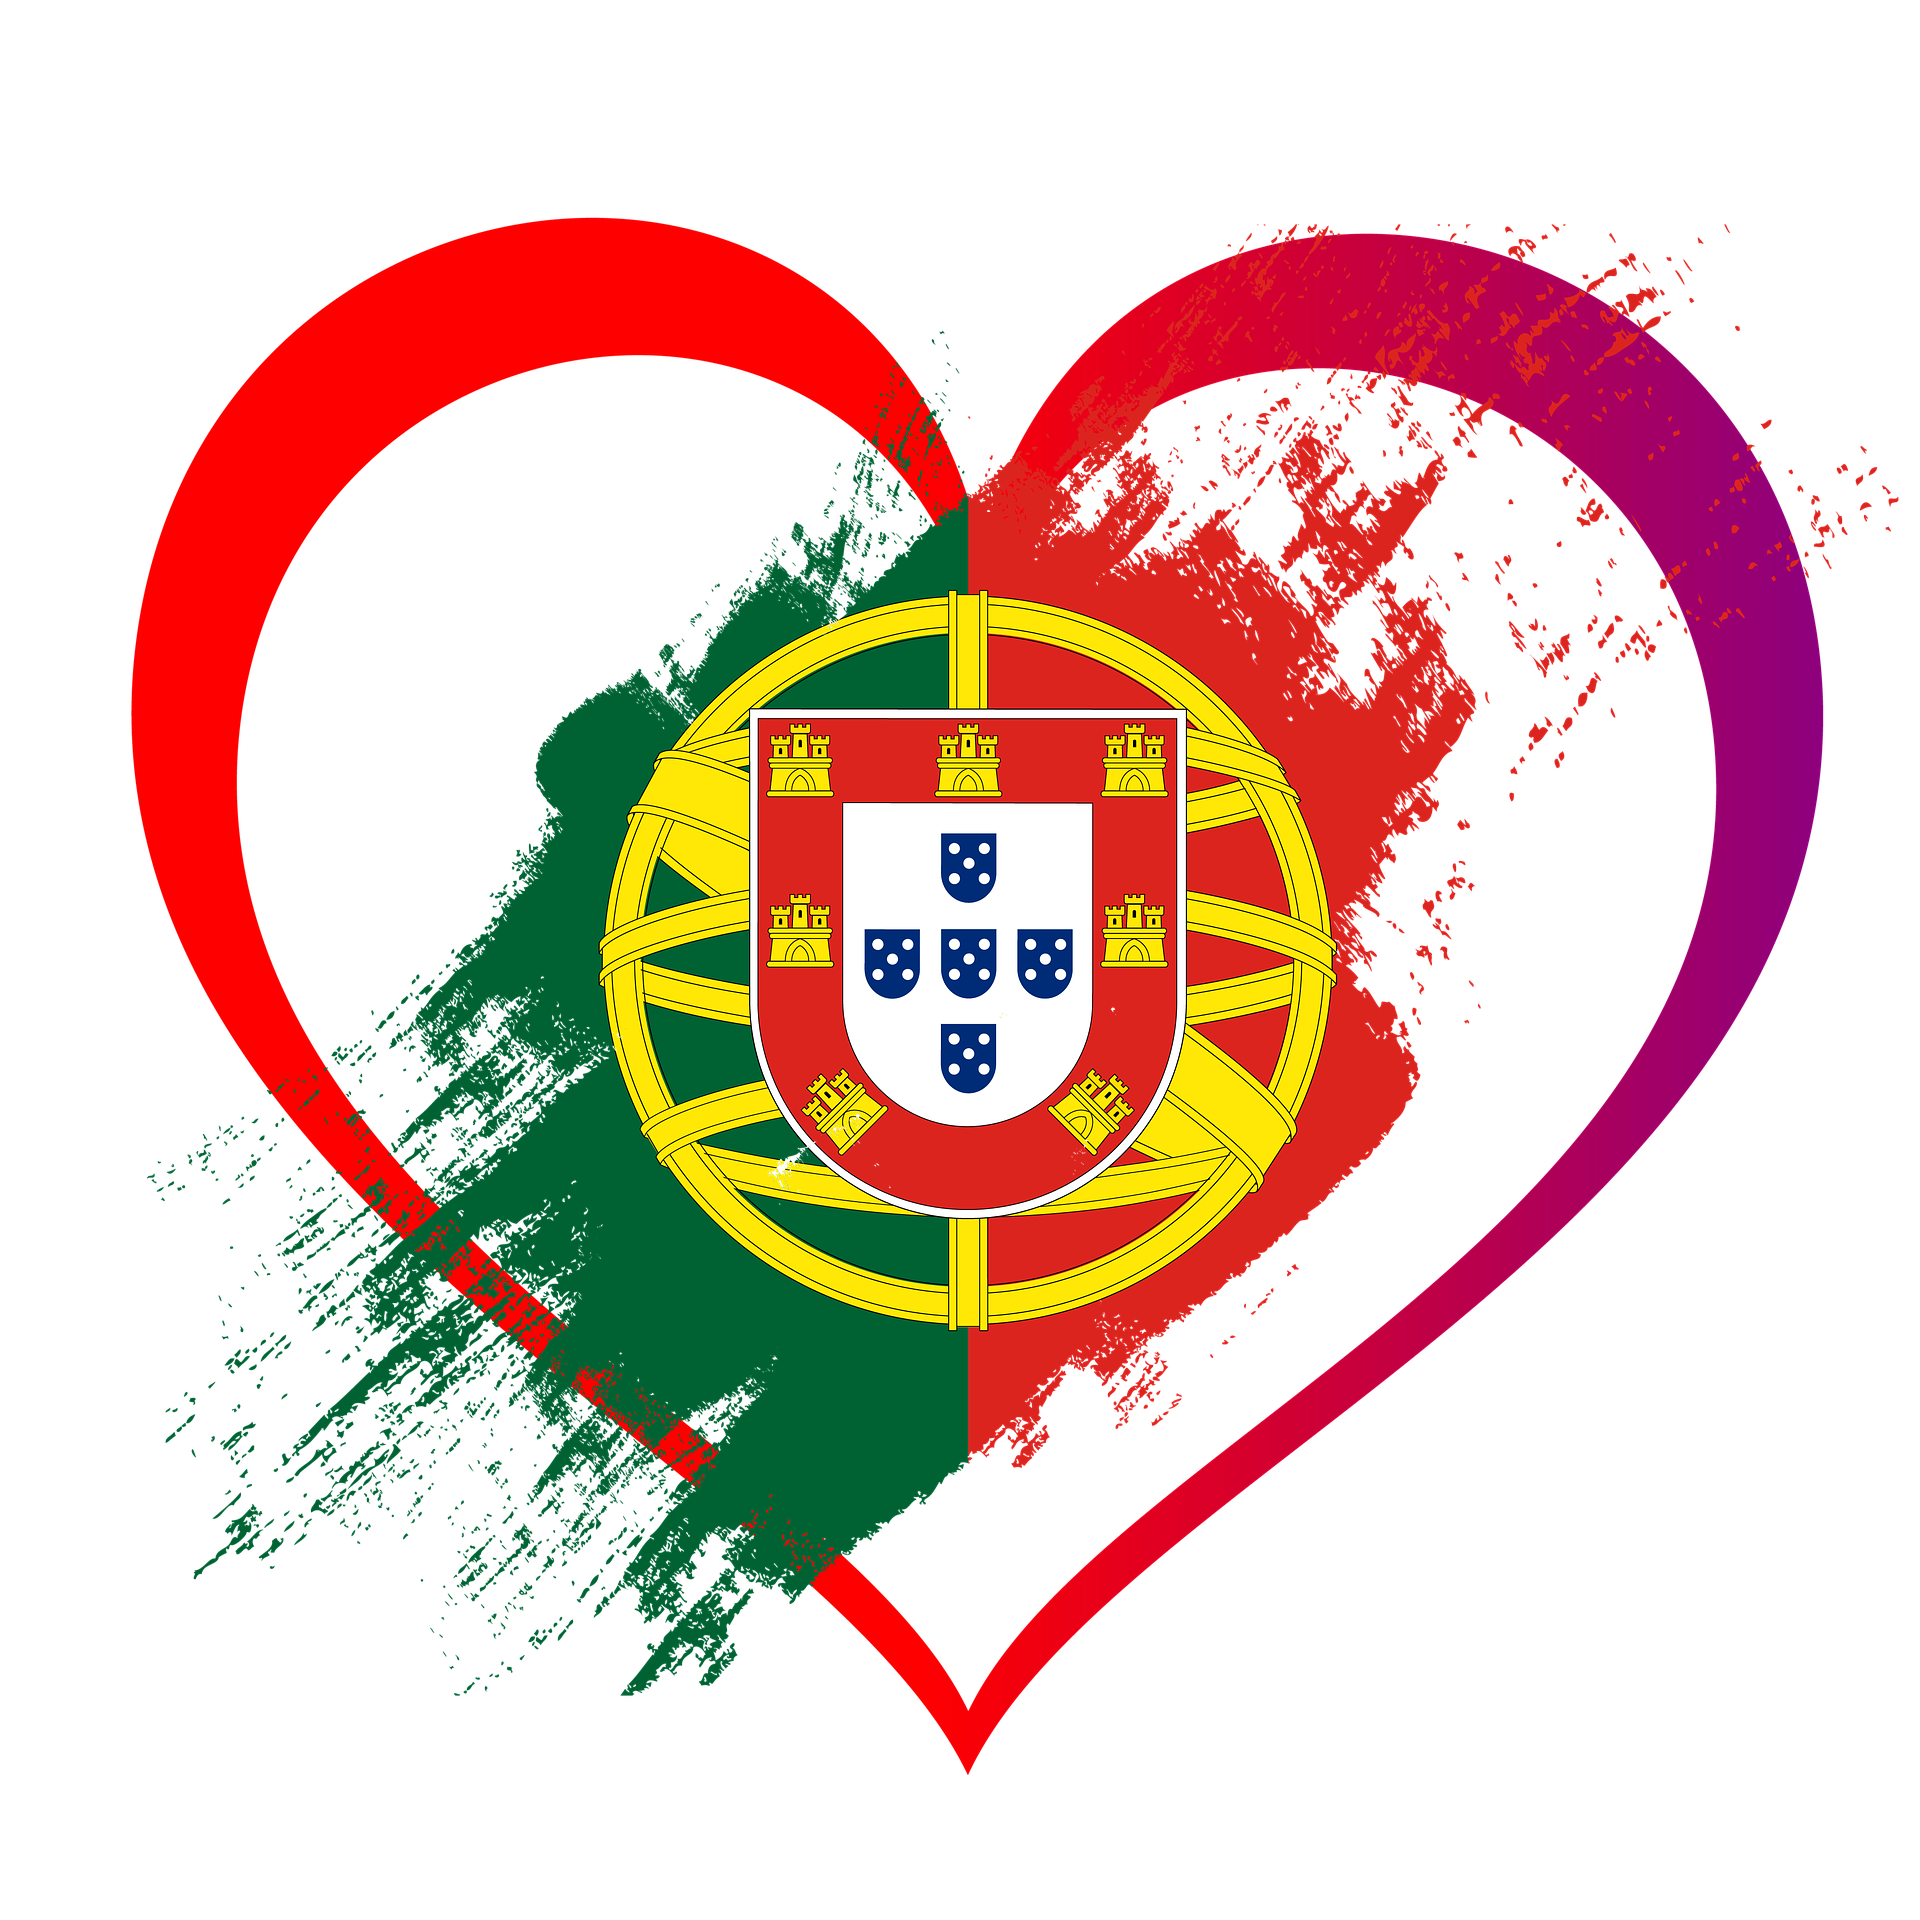 Portugal's coat of arms inside a heart